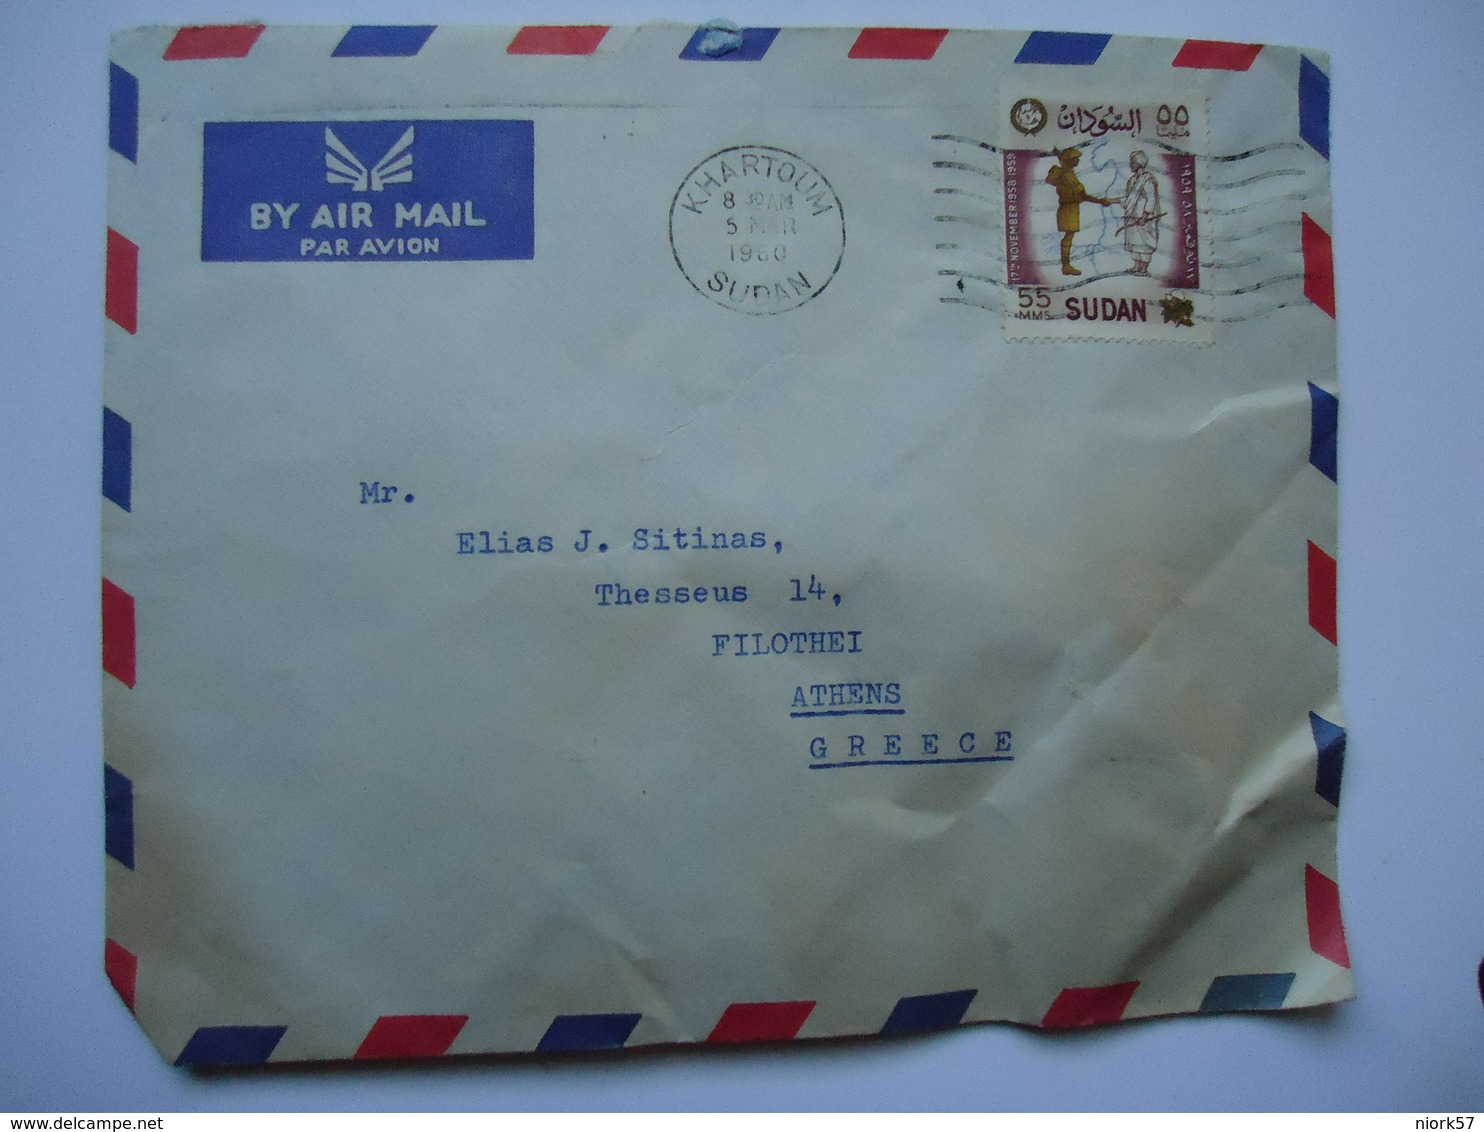 GREECE    COVER SUDAN  1960  WITH POSTMARK  XALADRION CHALADRION - Flammes & Oblitérations